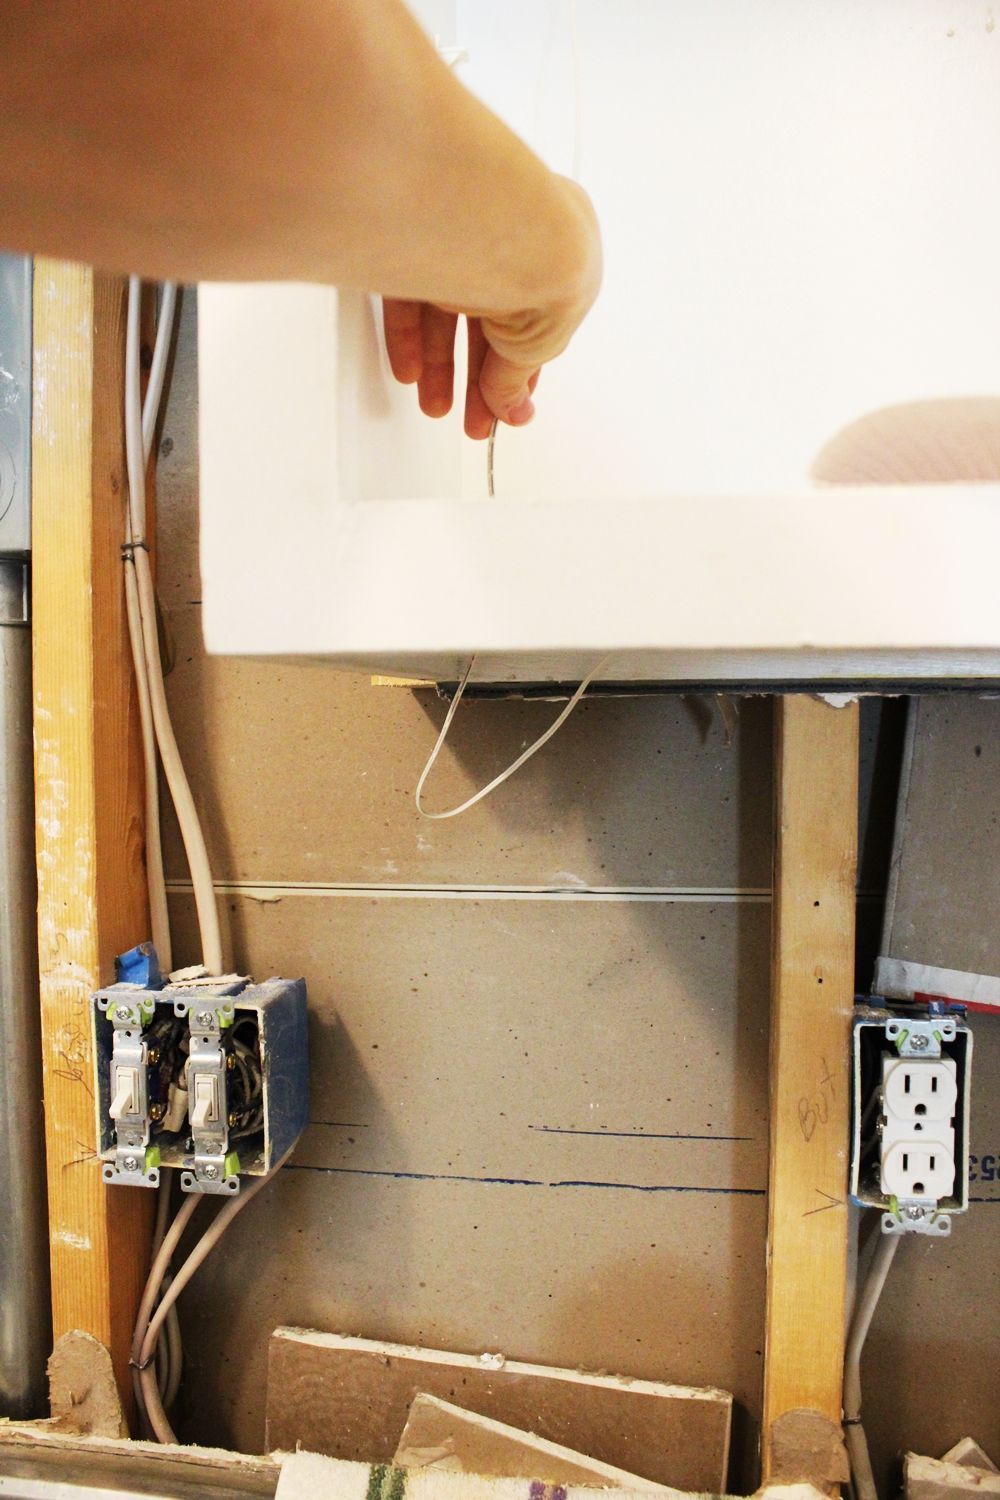 pull the excess wire up through the cabinet bottom